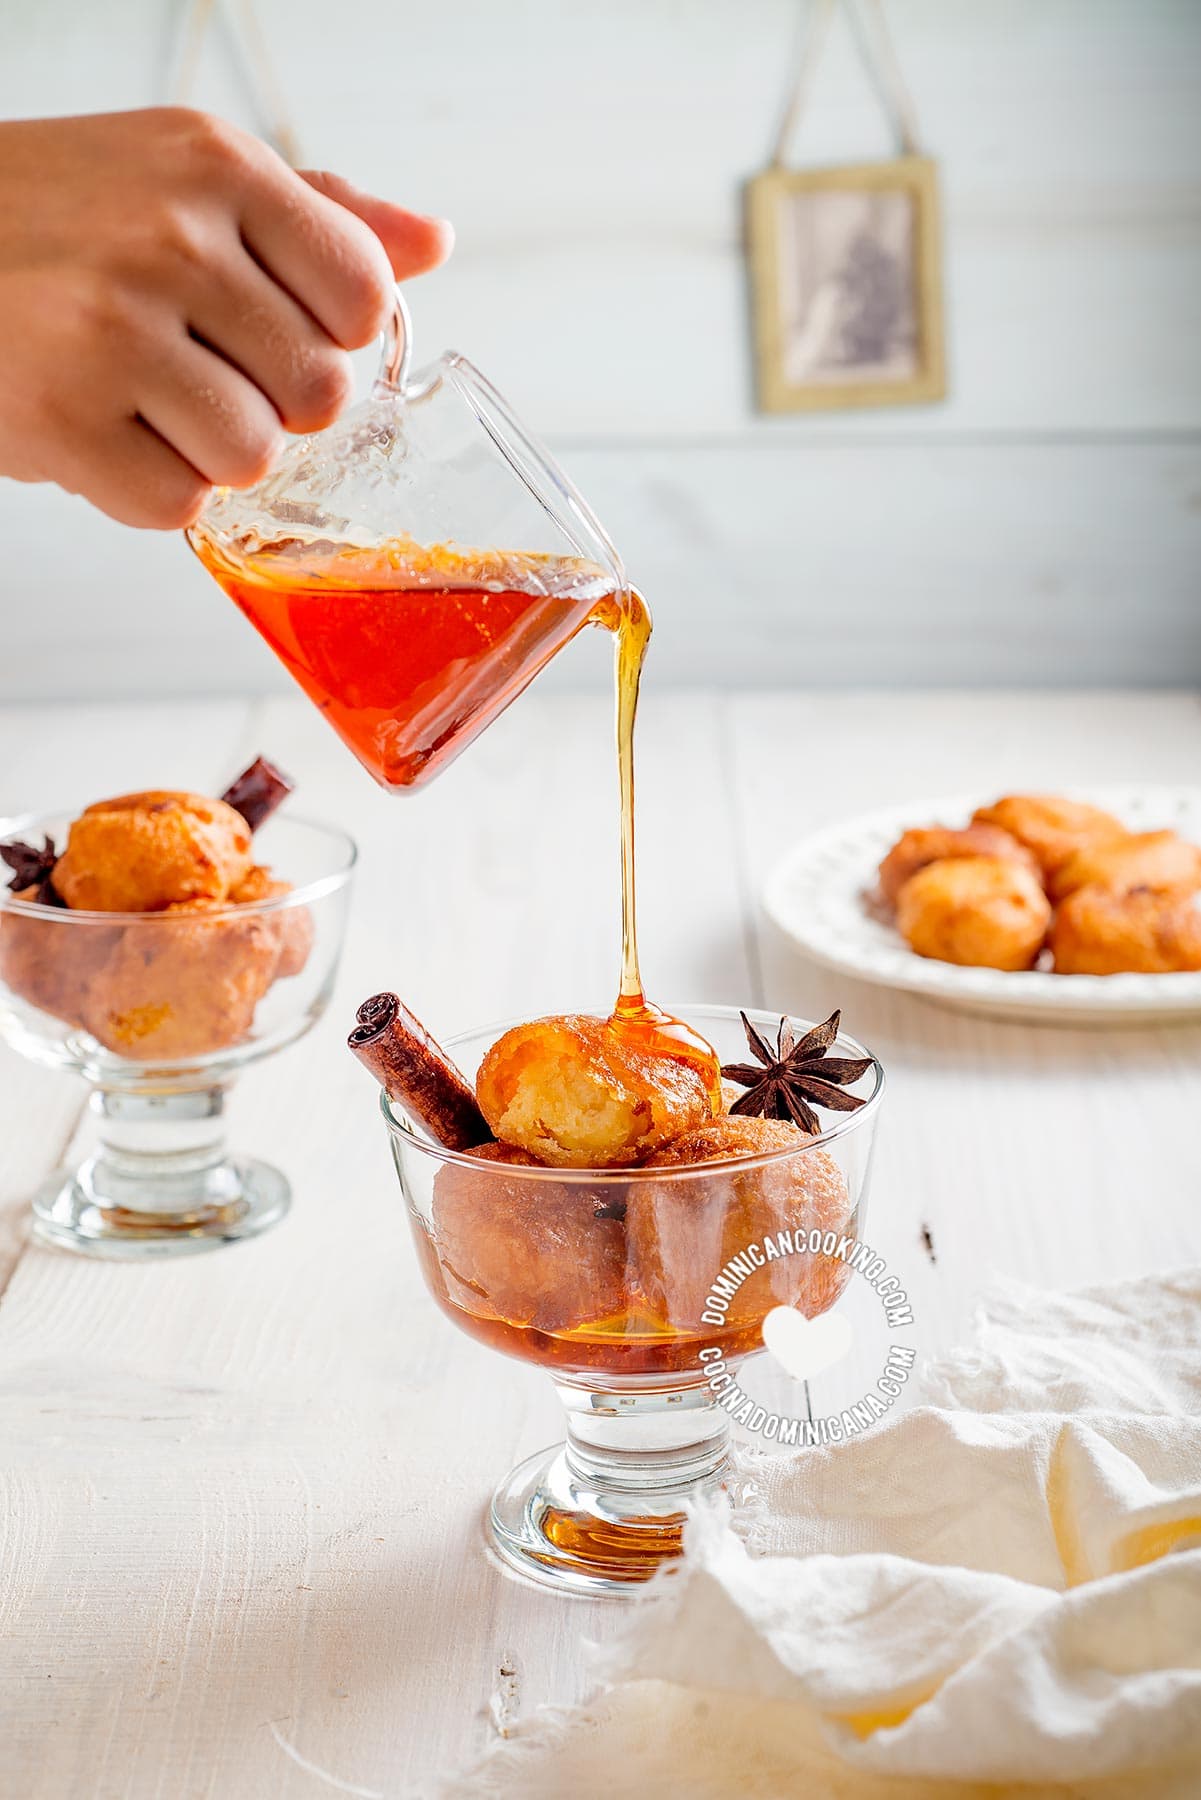 Buñuelos de yuca (cassava sweet puff fritters with spiced syrup).